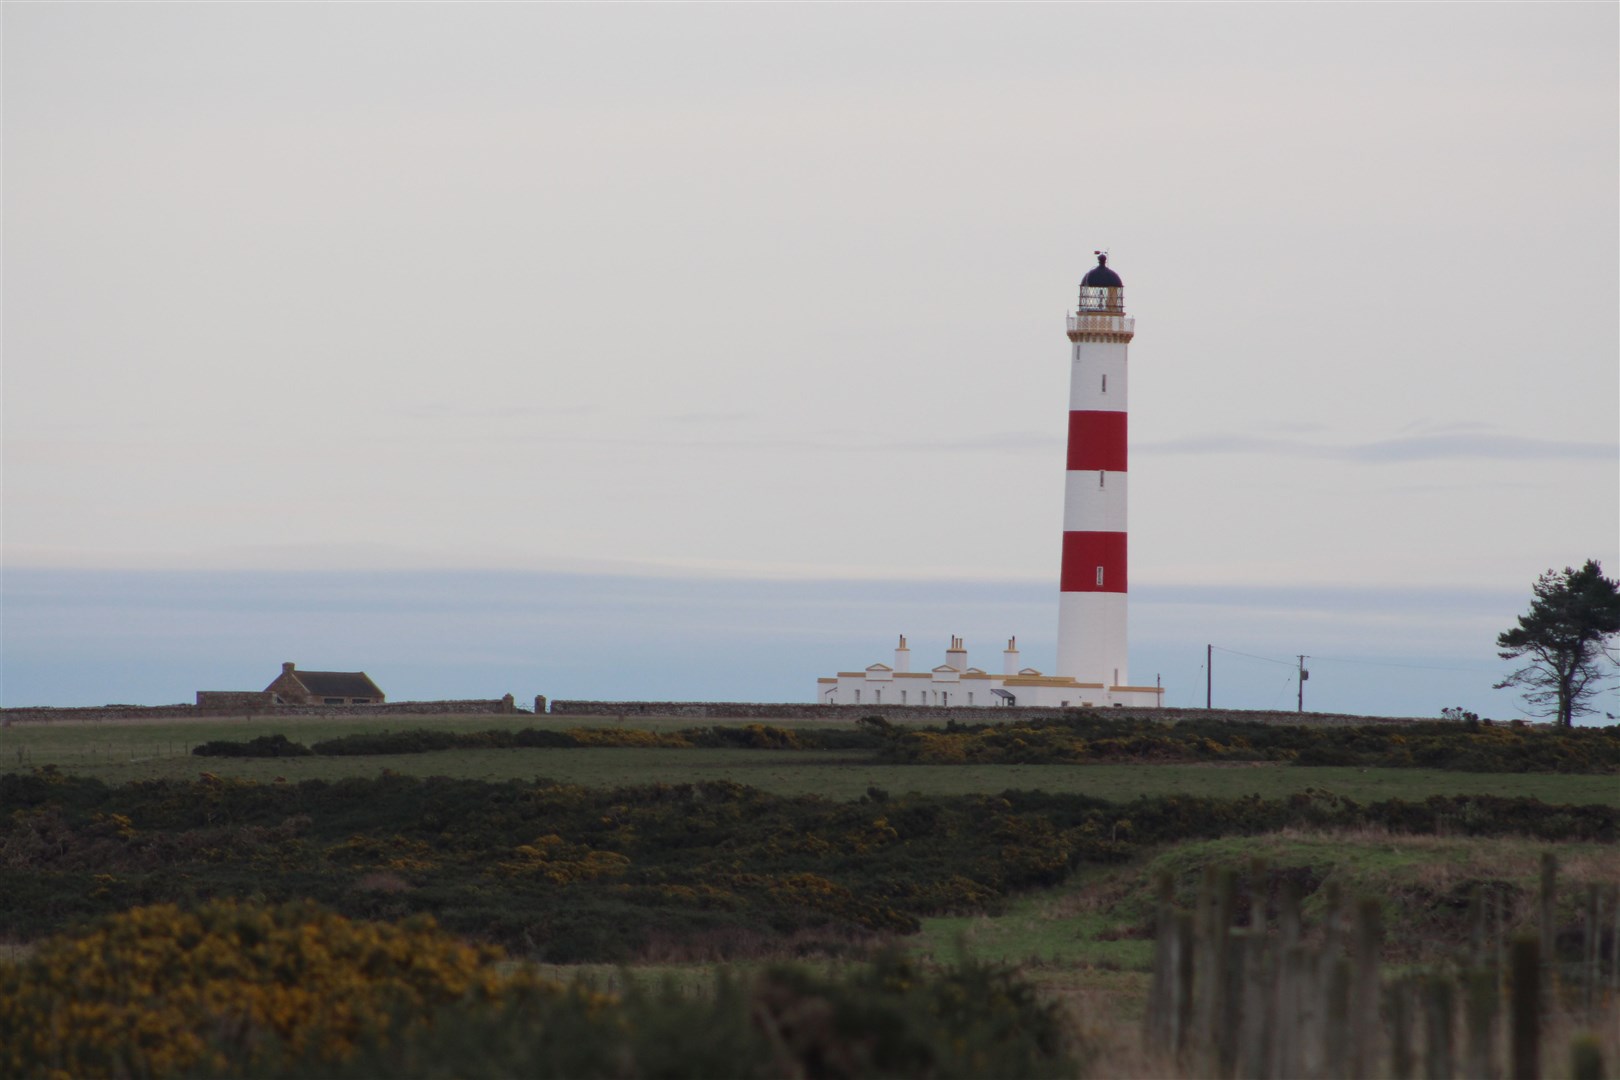 Tarbat Ness Lighthouse is a prominent landmark and a circuit can be made from Portmahomack.